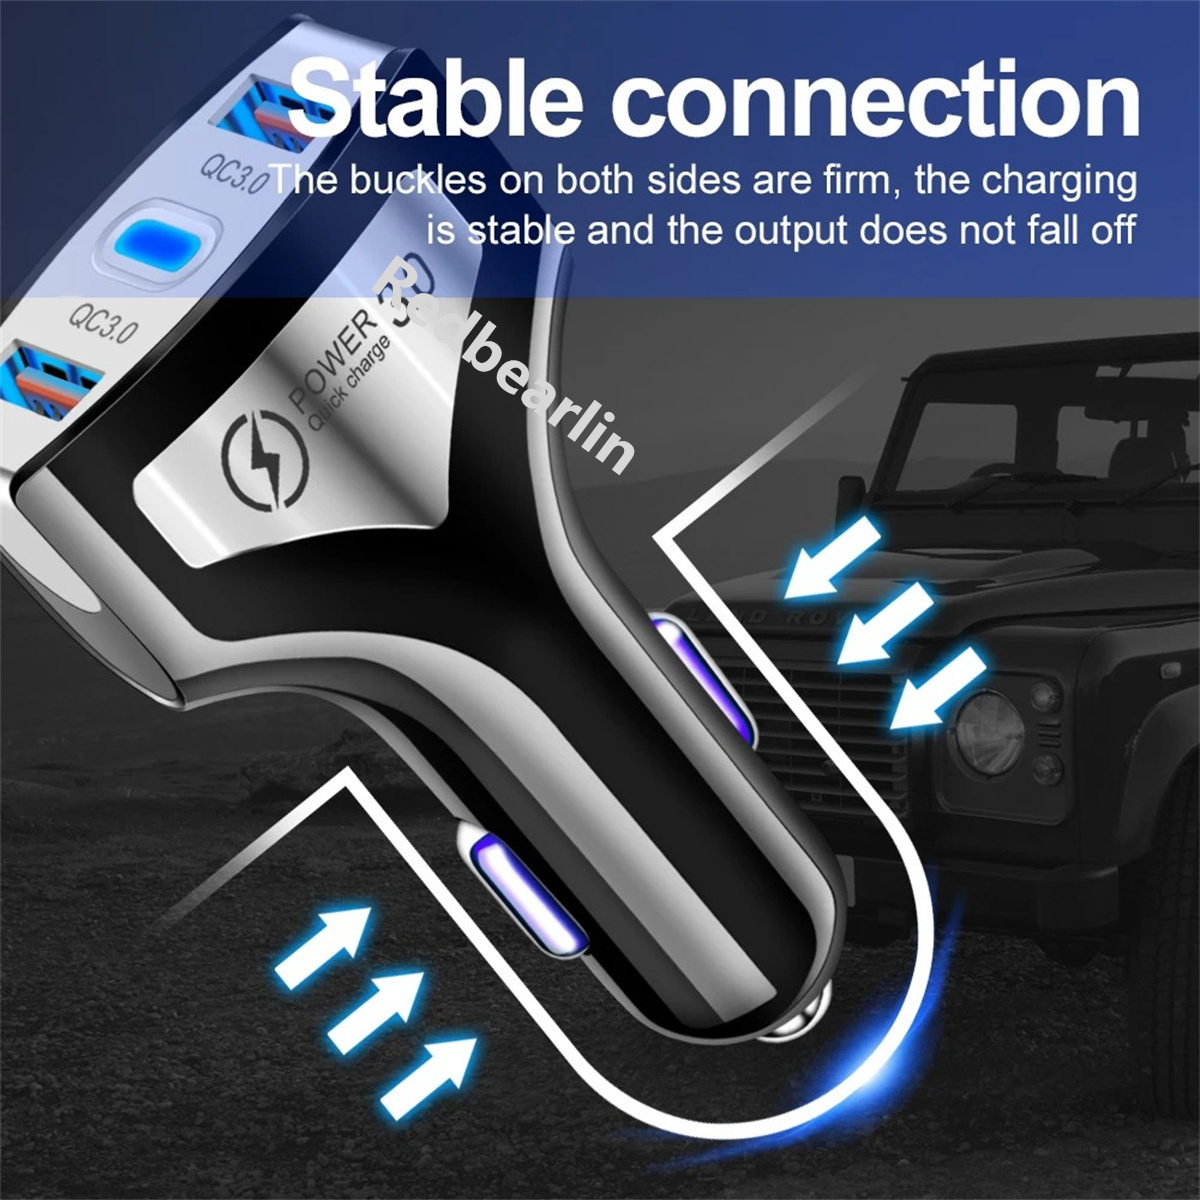 33W Fast Quick Charging PD USB C QC3.0 Car Charger 3 Ports Type c Auto Power adapter Chargers For Ipad Iphone 12 13 14 15 Pro max Samsung xiaomi Huawei With Retail Box